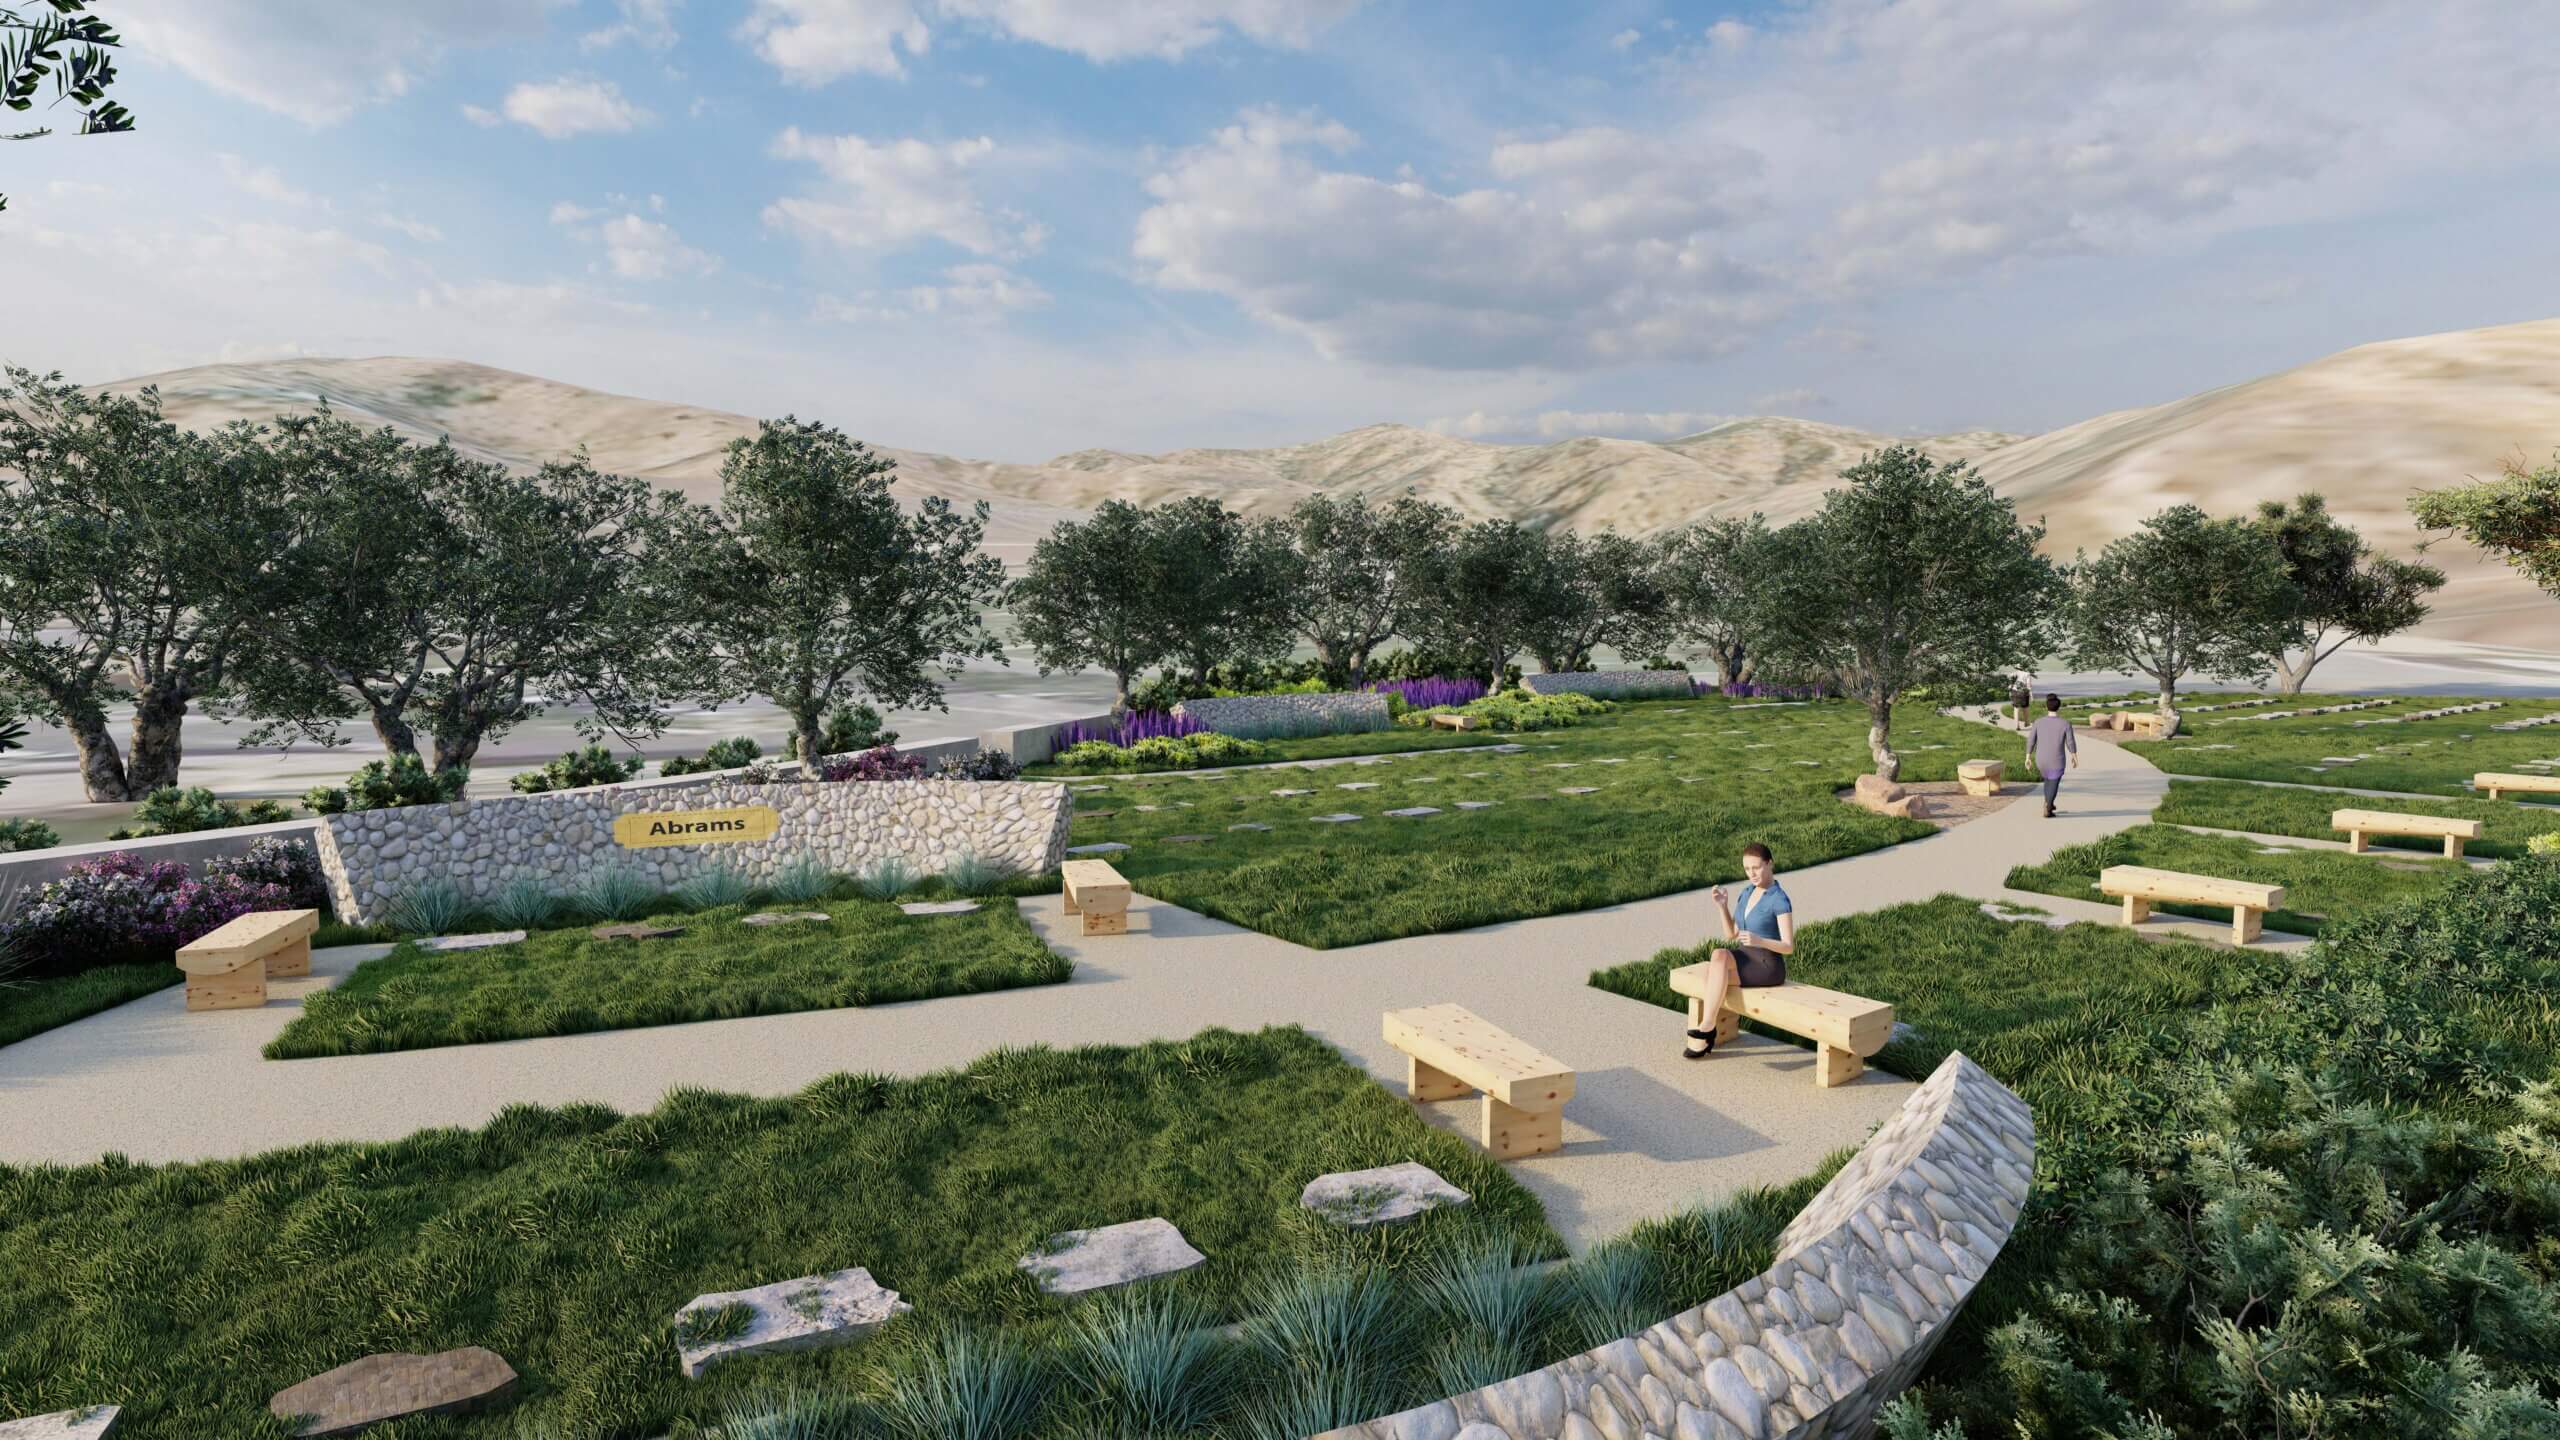 A rendering of the planned natural burial area at Sinai Memorial Park in Simi Valley, which will feature drought-tolerant landscaping.